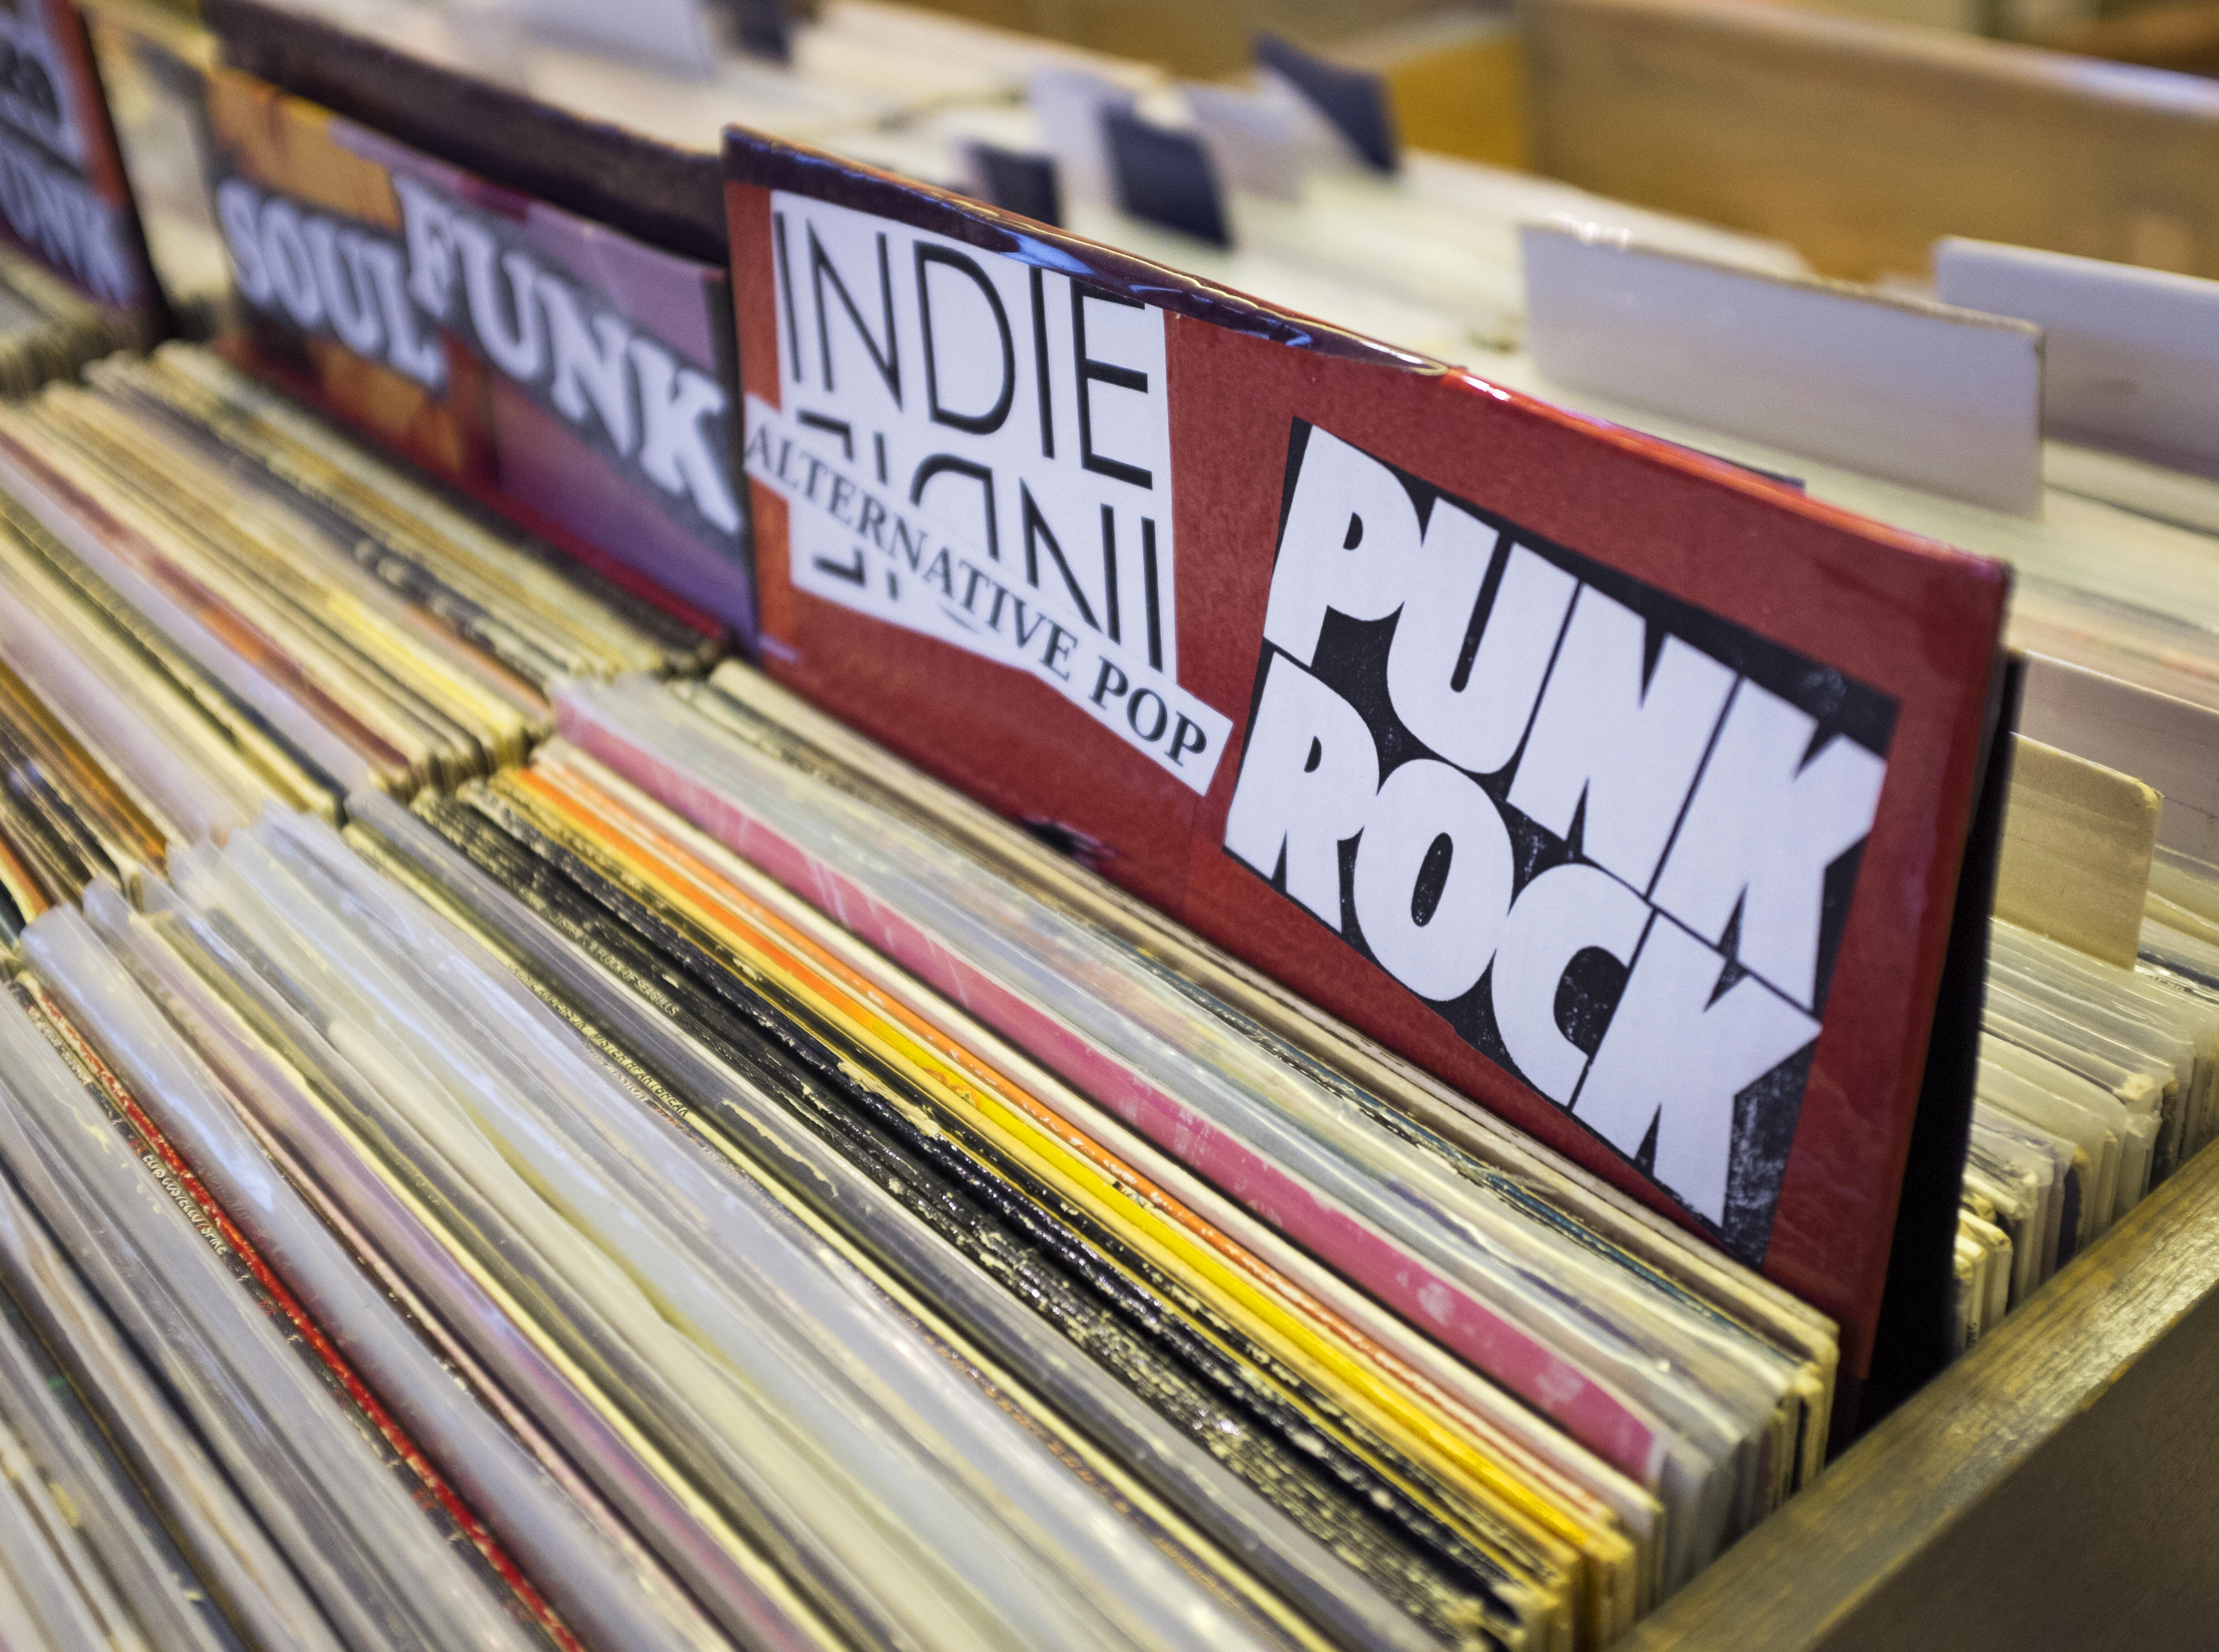 CLOSING: The Only Record Store in NE Minneapolis - Thumbnail Image